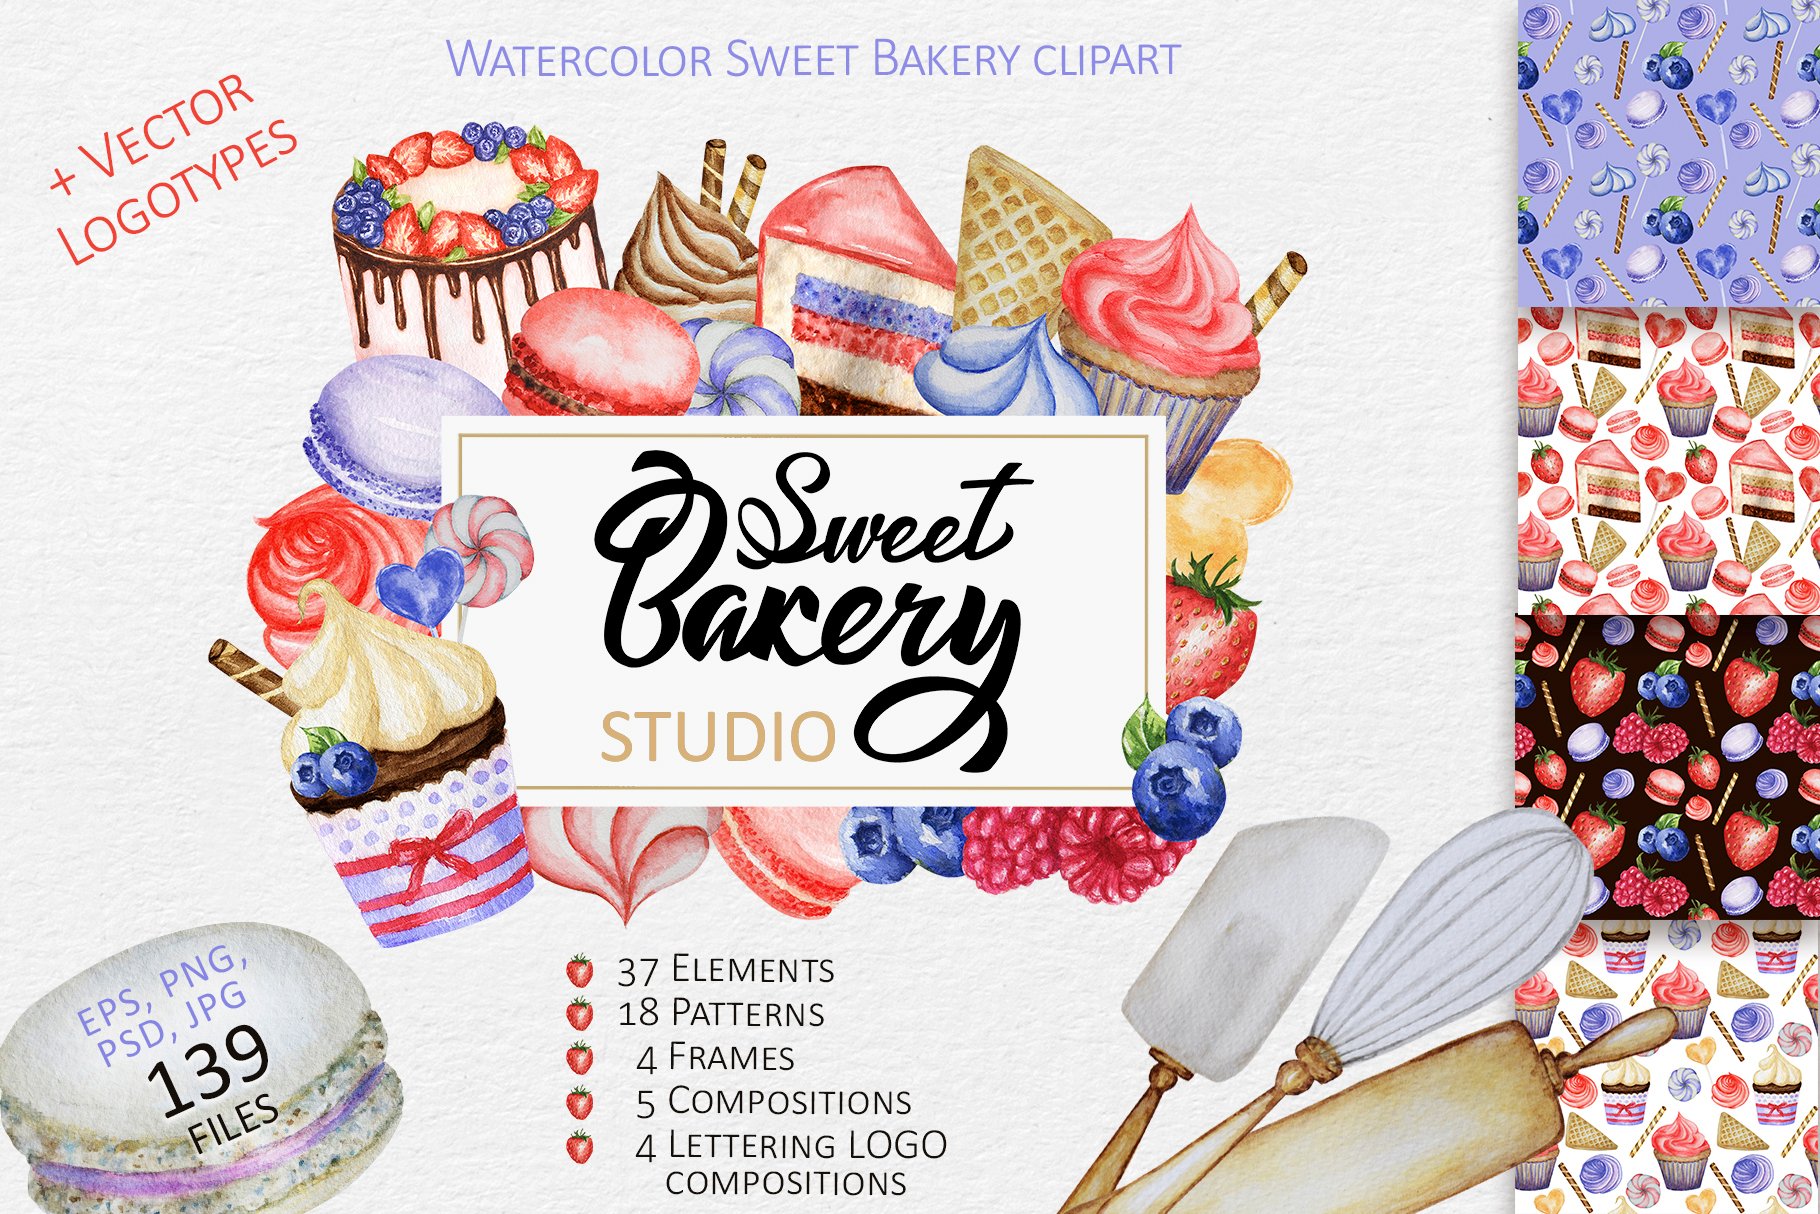 Sweet Cake Baking Watercolor clipart cover image.